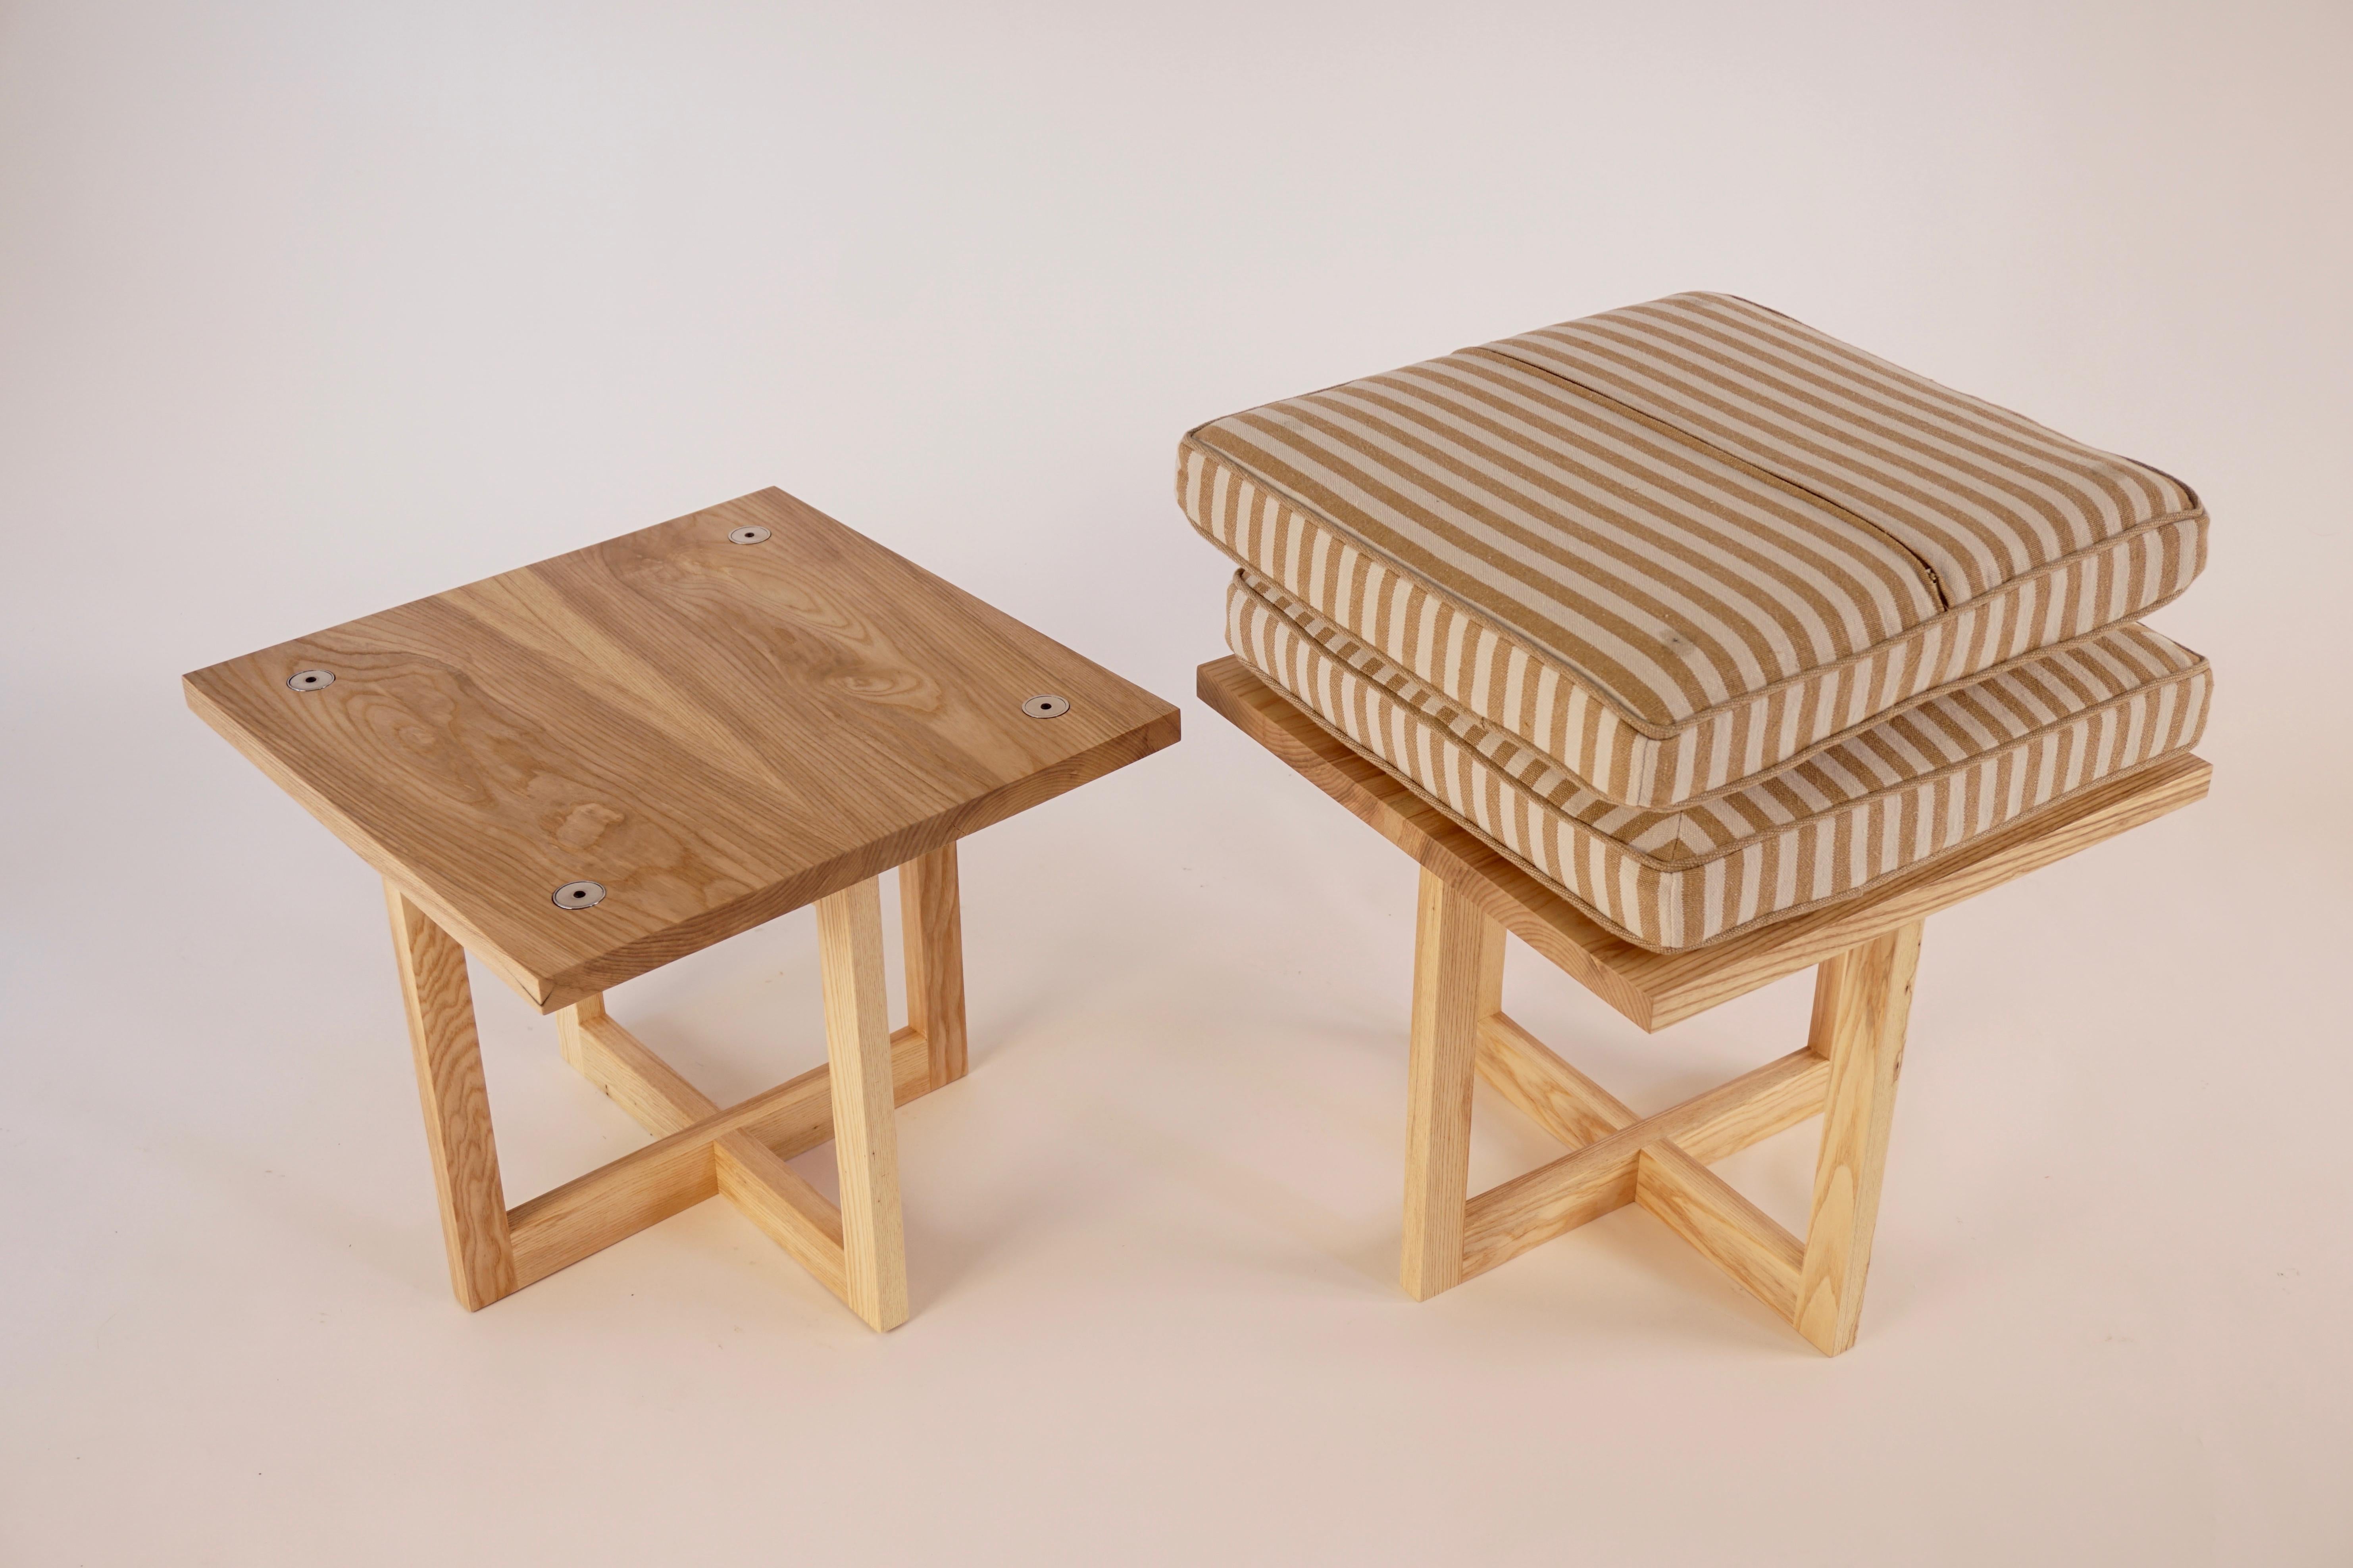 White Ash Grid Base Stools - Set of Two In New Condition For Sale In Bangall, NY